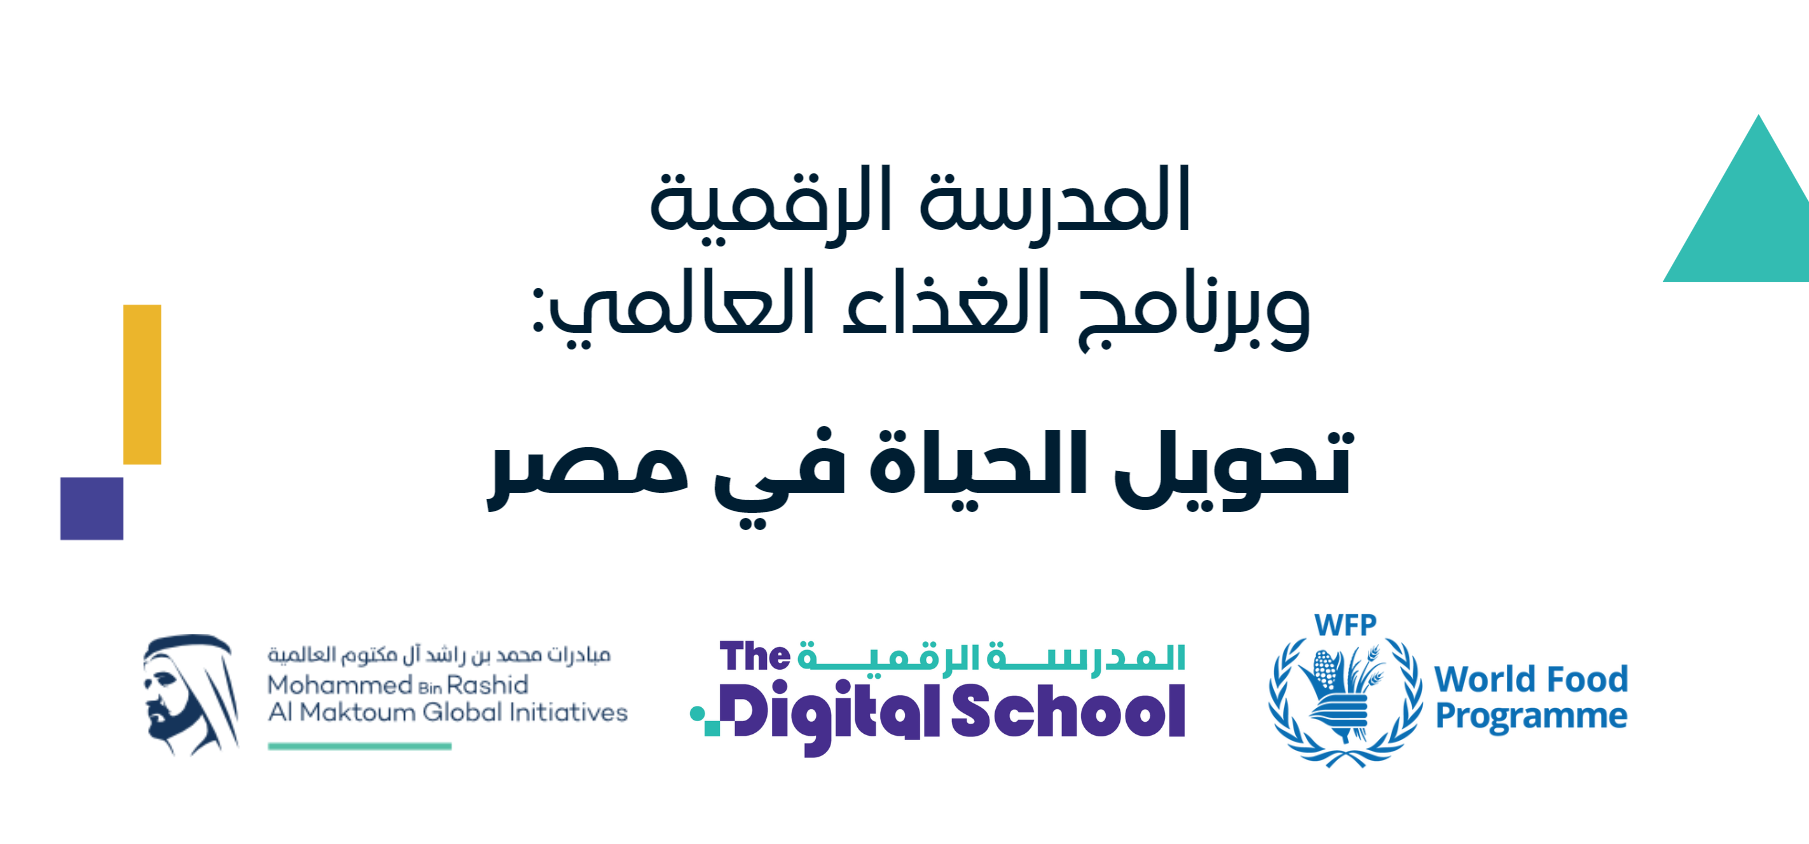 The Digital School and World Food Programme: Transforming lives in Egypt